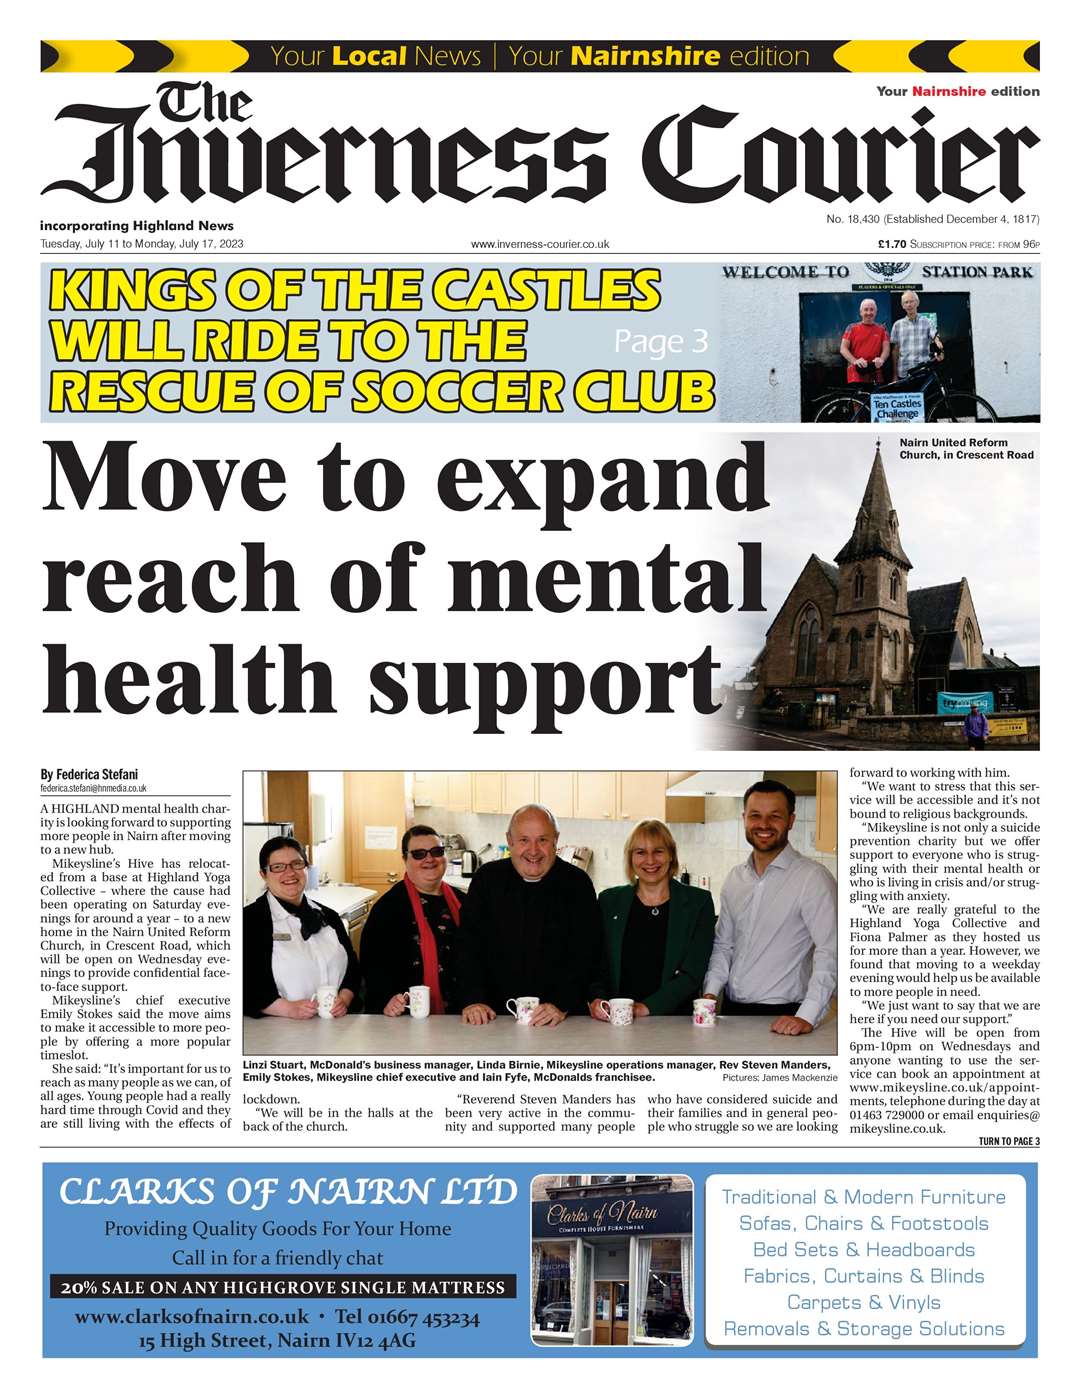 The Inverness Courier (Nairnshire edition), July 11, front page.